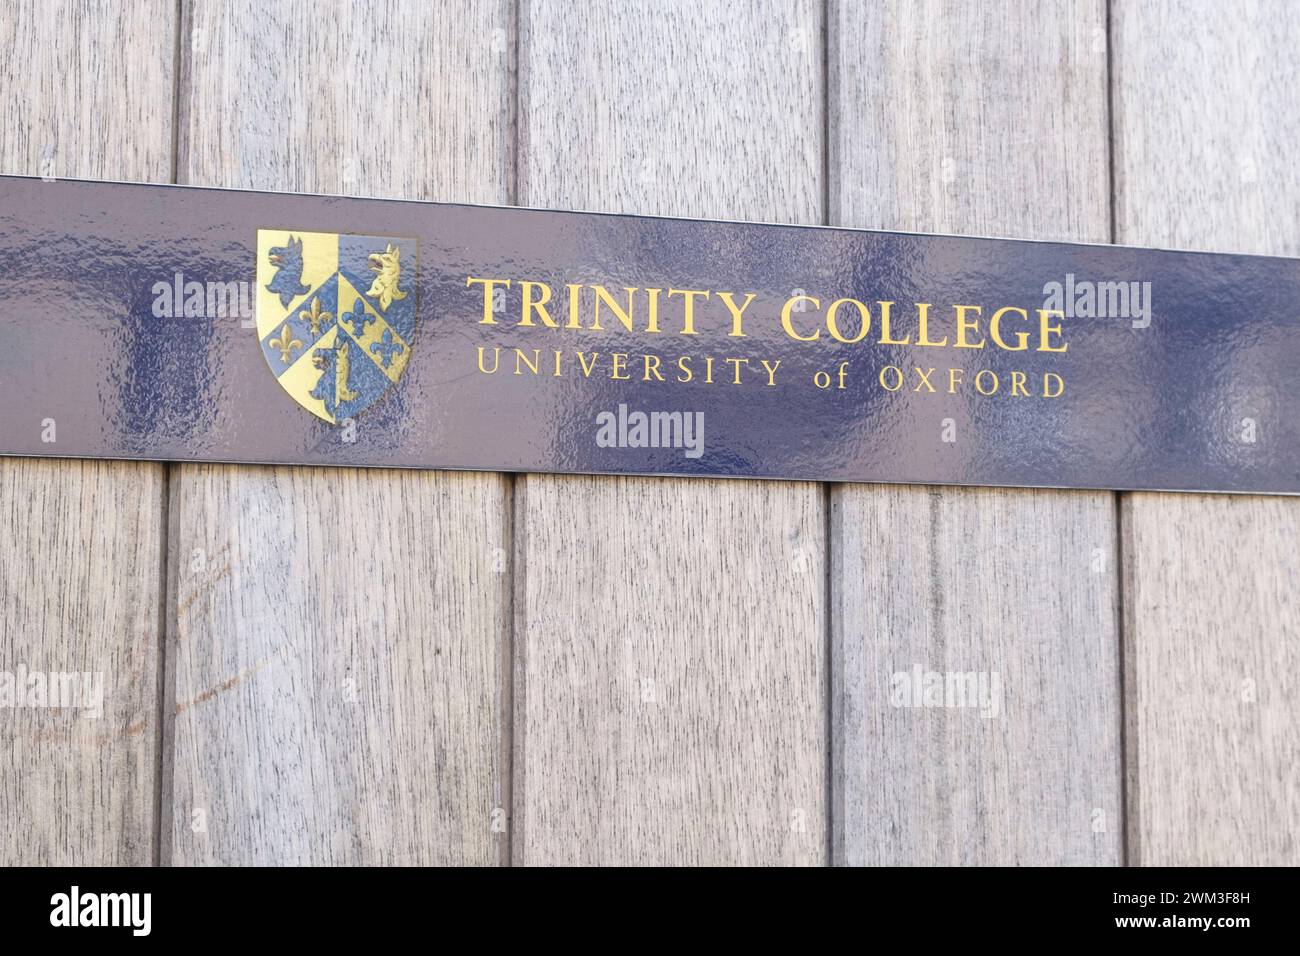 Around the University city of Oxford UK. Sign for Trinity College University of Oxford Stock Photo